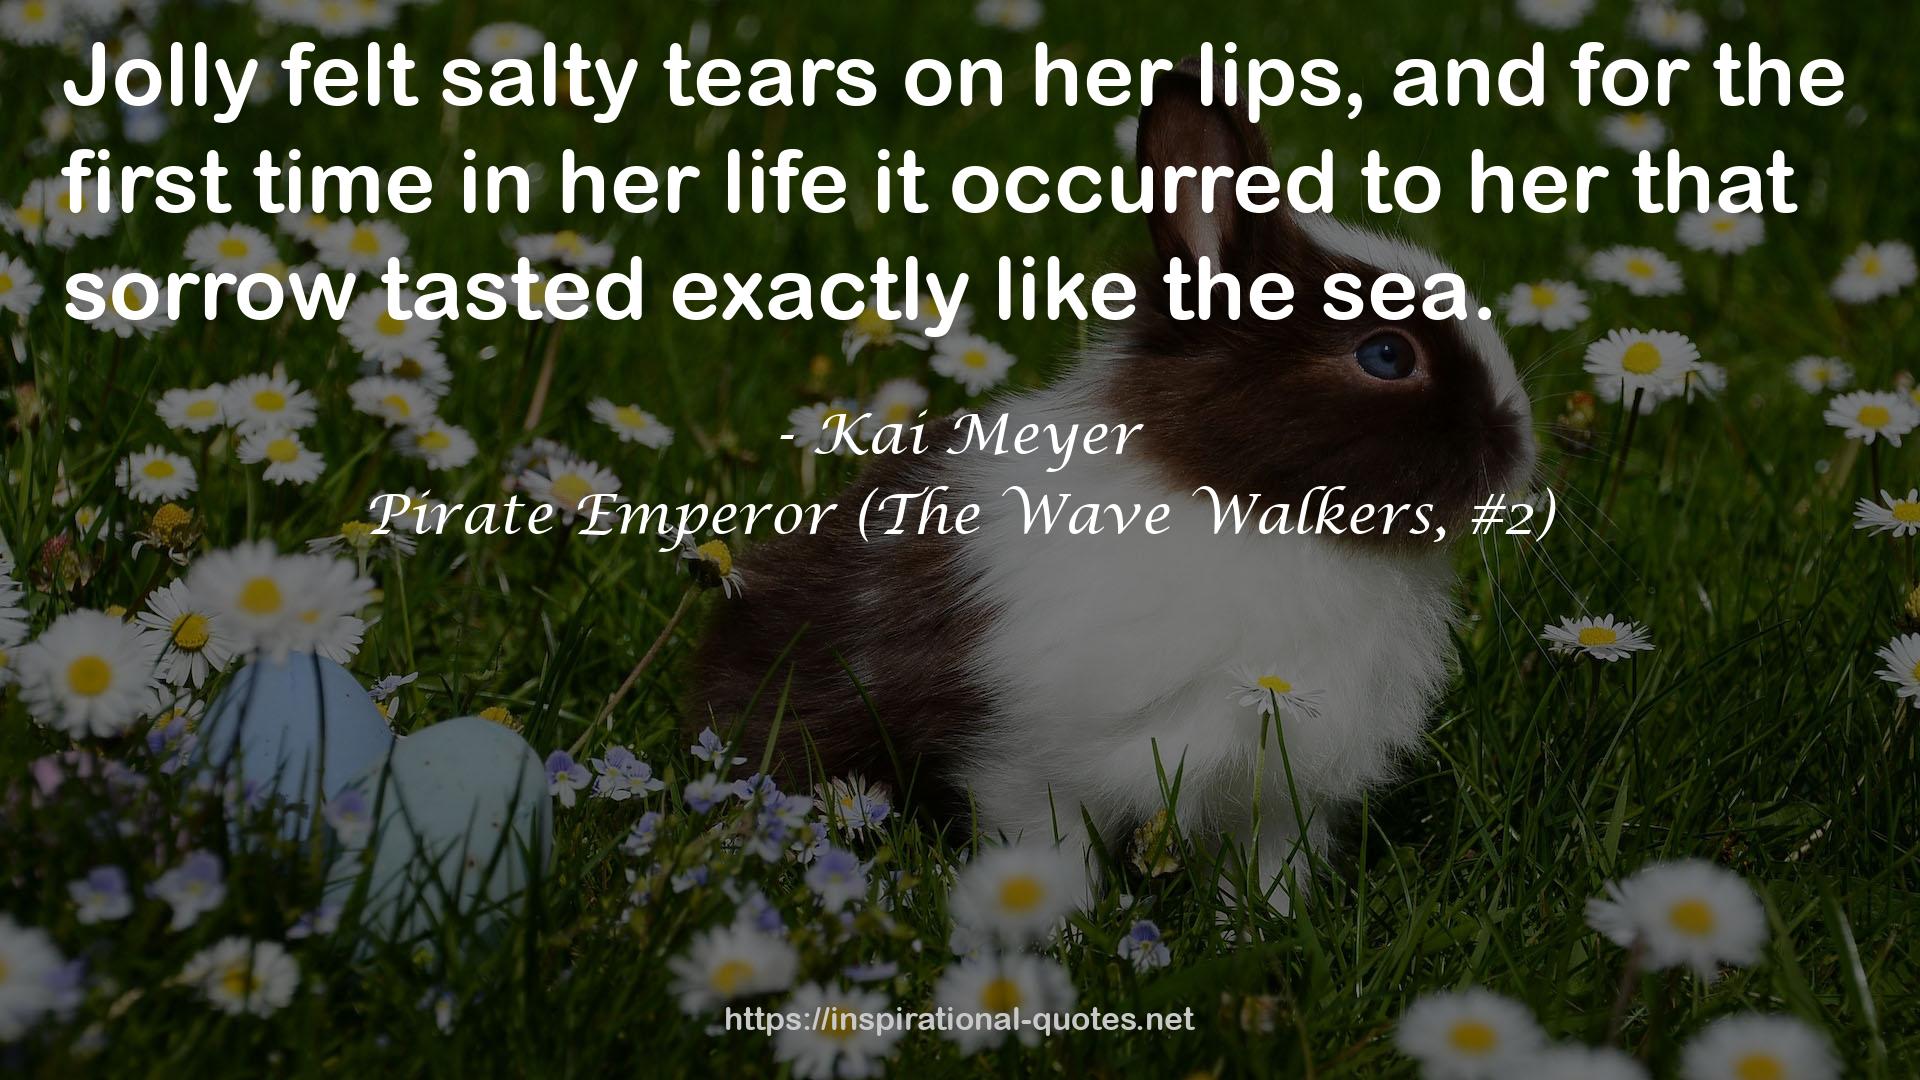 Pirate Emperor (The Wave Walkers, #2) QUOTES